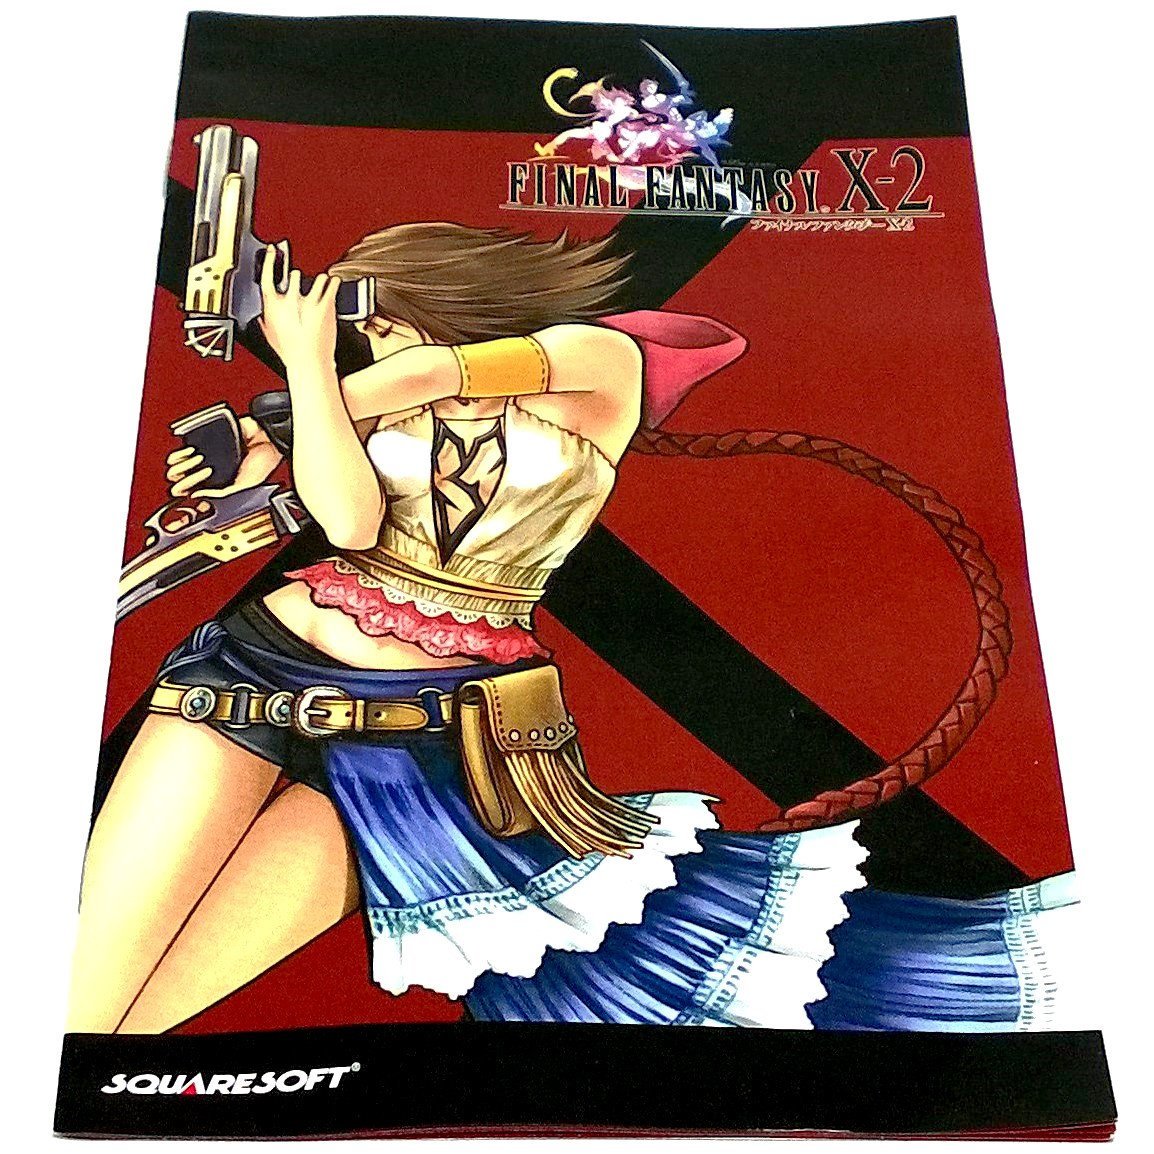 Final Fantasy X-2 for PlayStation 2 (Import) - Front of manual